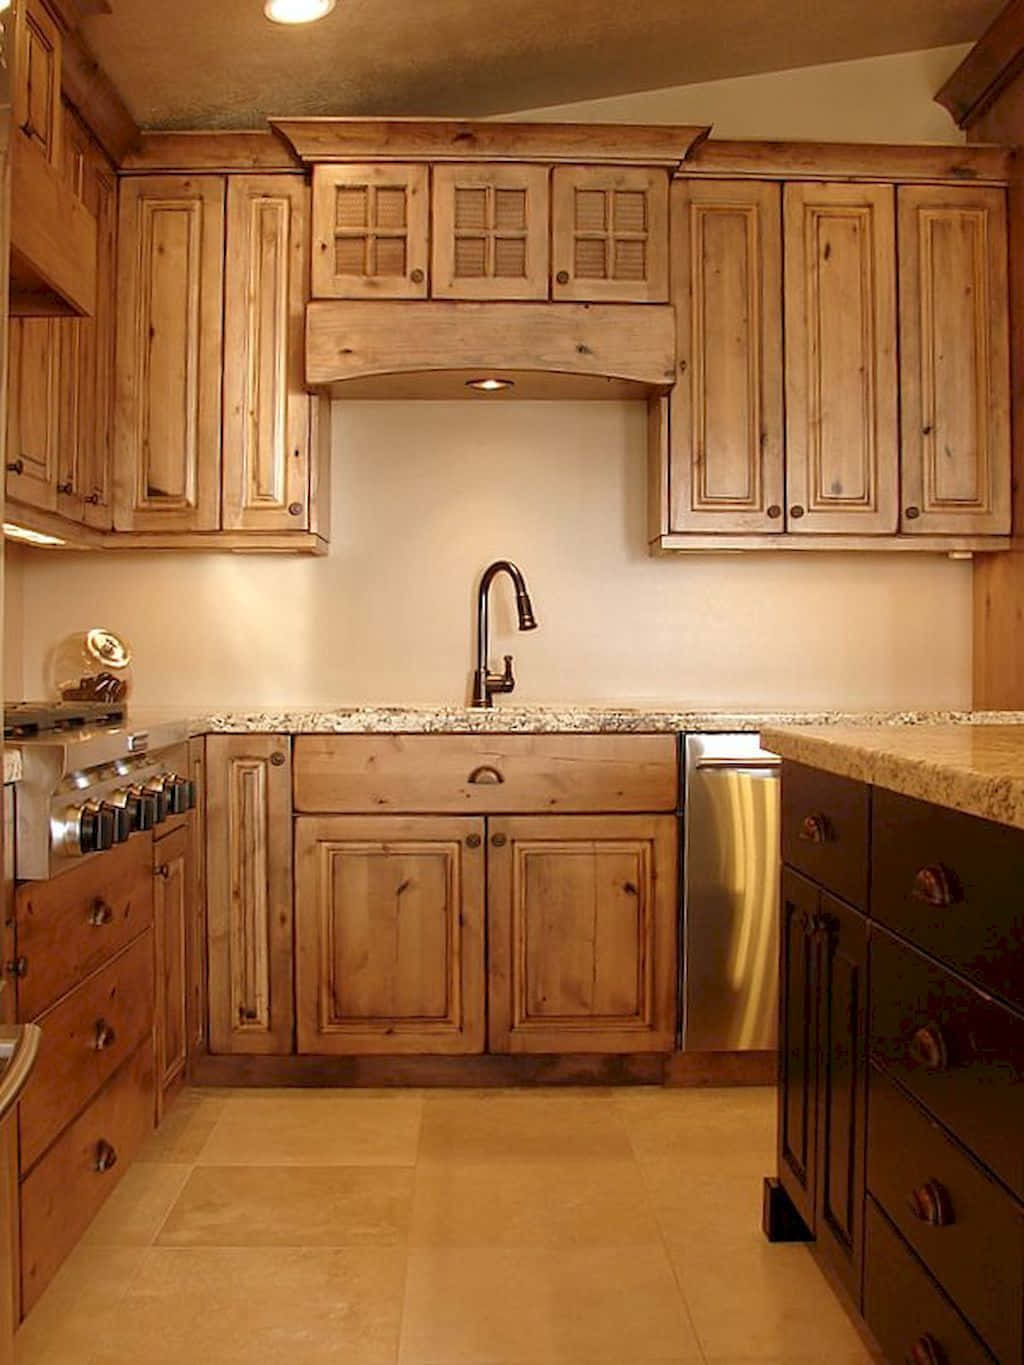 A Kitchen With Wooden Cabinets And Granite Counter Tops